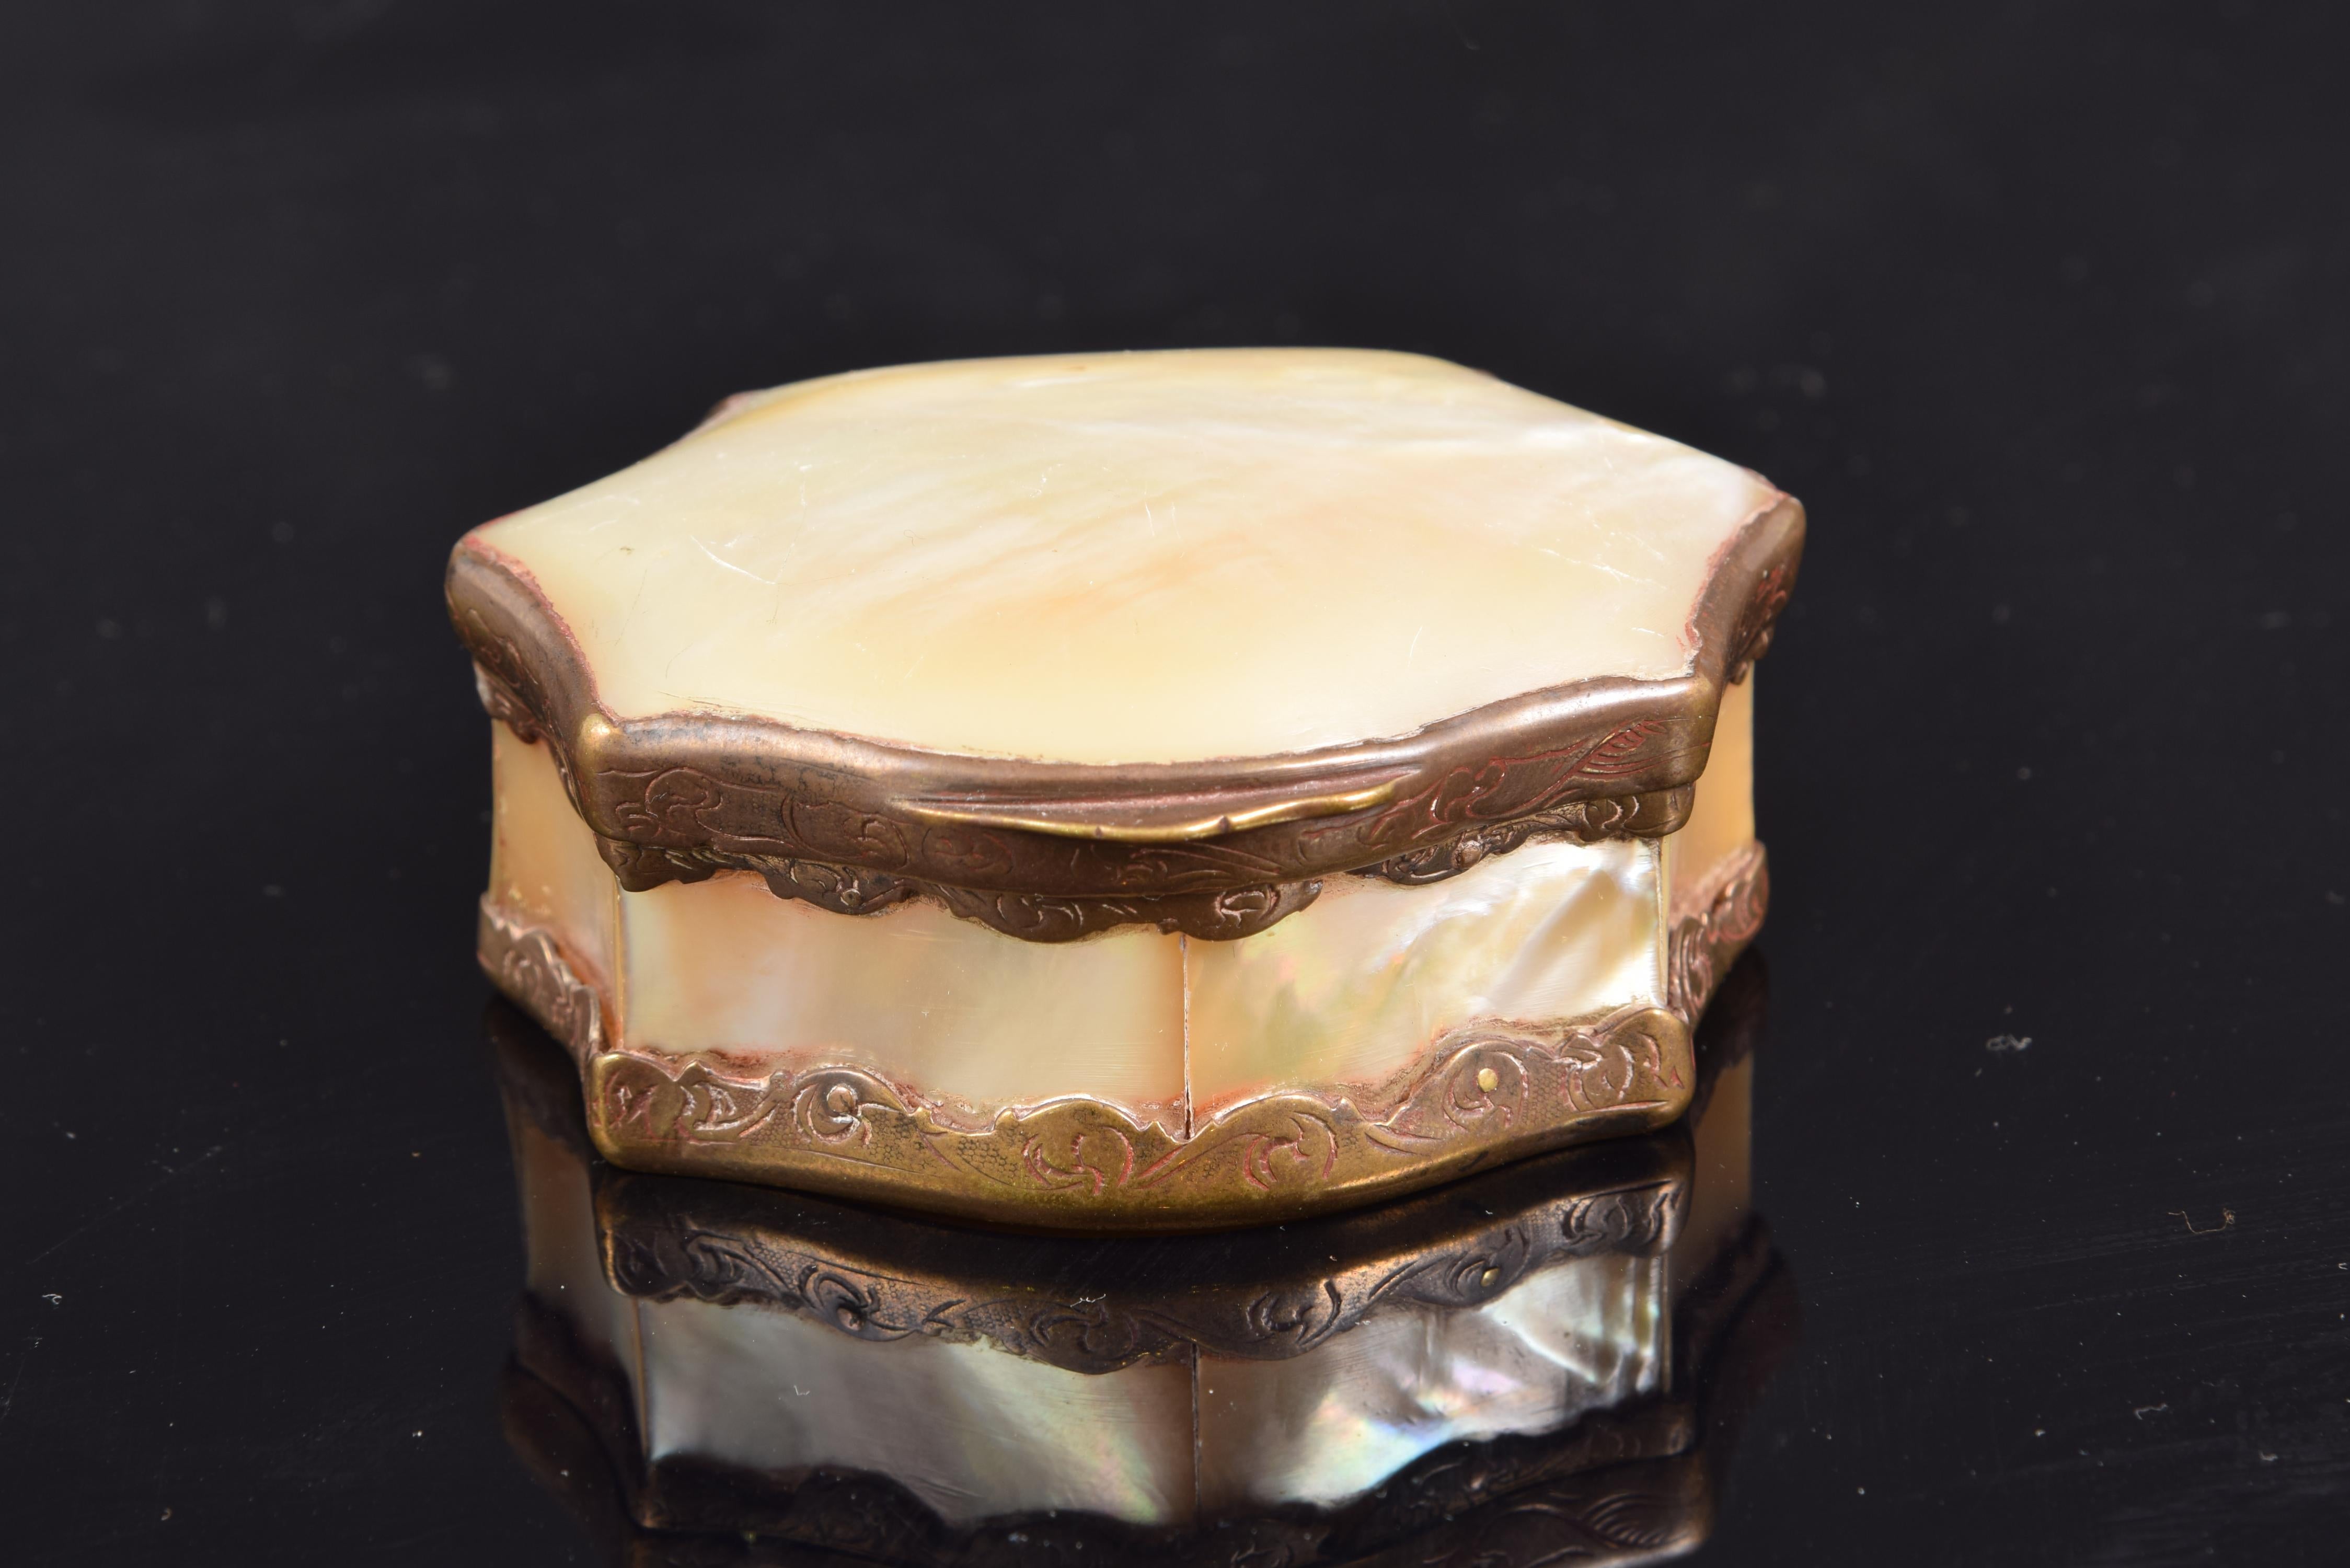 Mother of pearl box with bronze frame, 19th century.
Box made of mother of pearl plates joined thanks to a bronze structure decorated with simple plant elements and which still has traces of gilding in some areas. The shape of the piece would